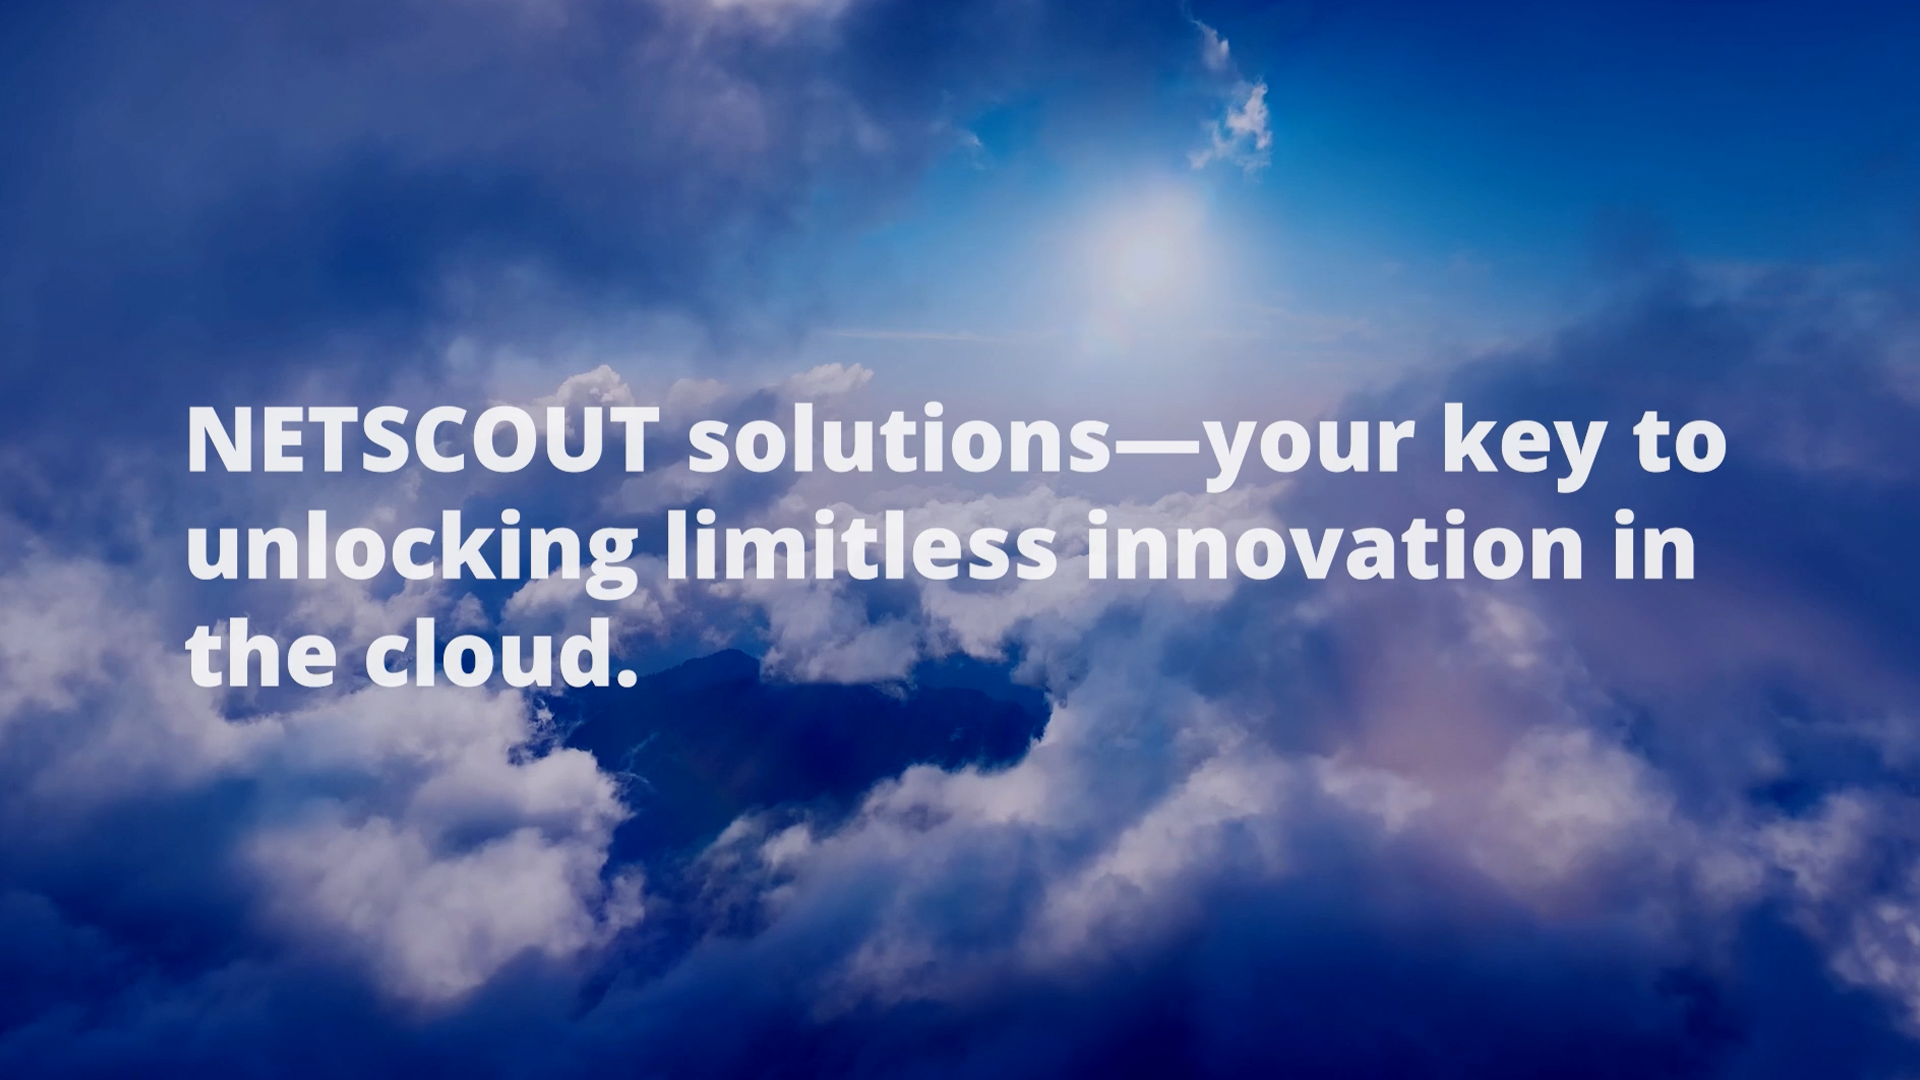 Performance Monitoring for Public Cloud Environments With NETSCOUT